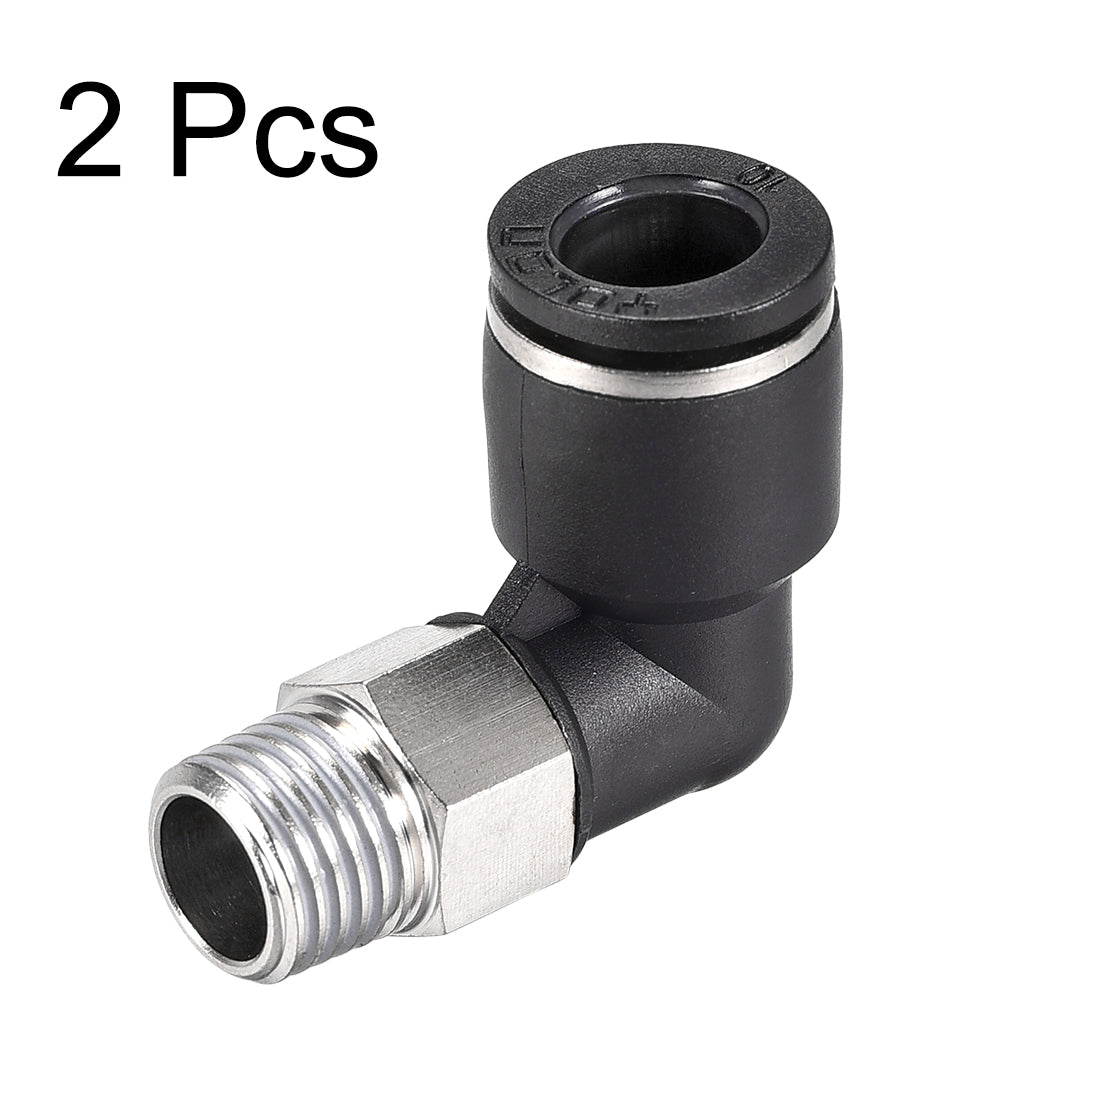 uxcell Uxcell Push to Connect Tube Fitting Male Elbow 10mm Tube OD x 1/4 NPT Thread Pneumatic Air Push Fit Lock Fitting 2pcs